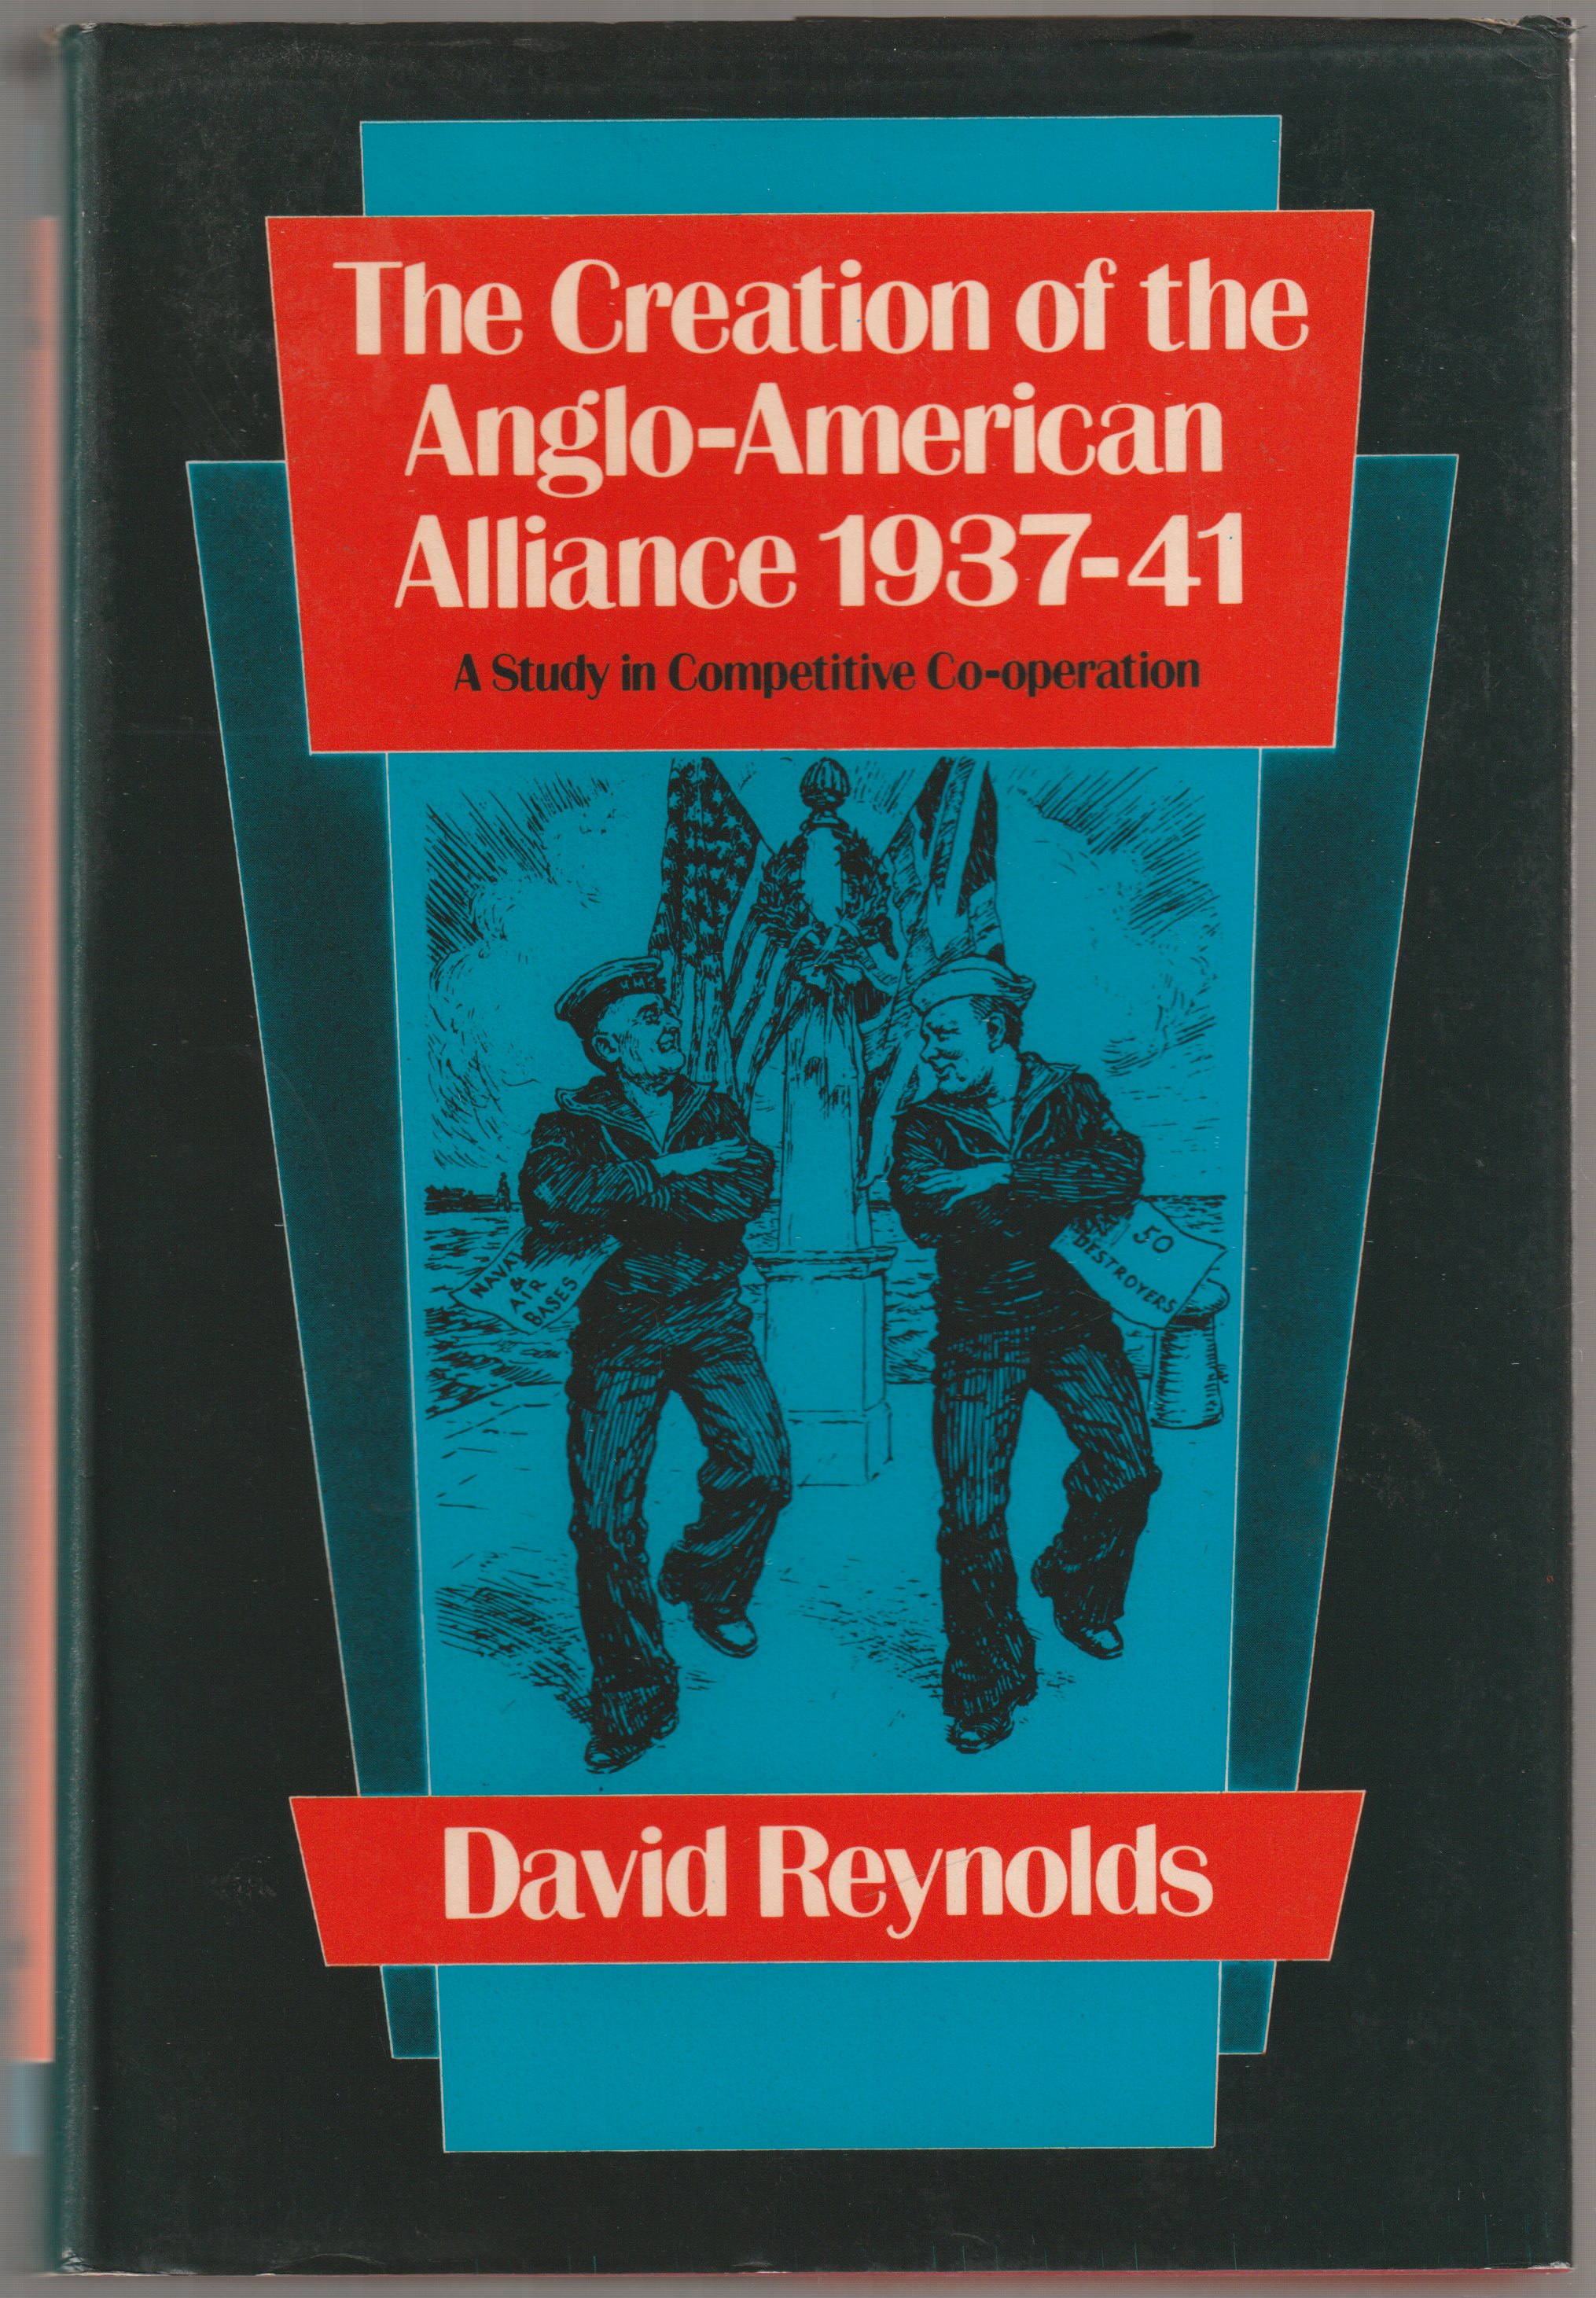 The creation of the Anglo-American alliance, 1937-41 : a study in competitive co-operation.